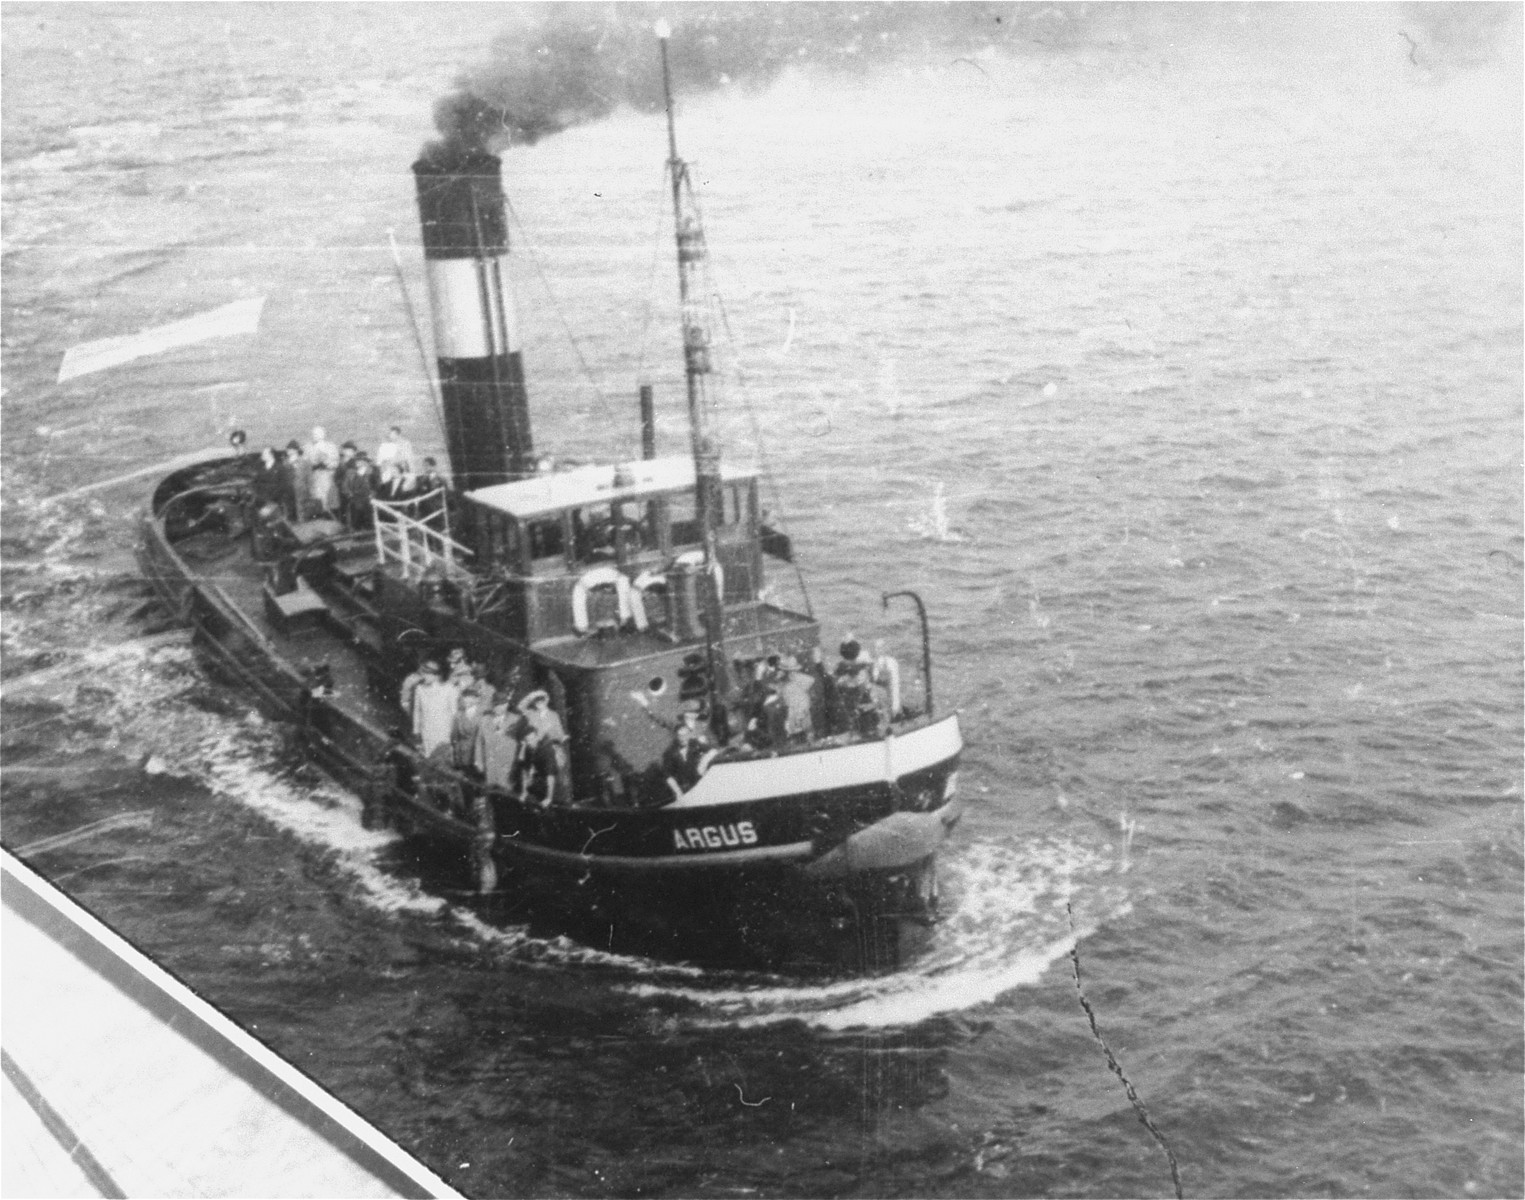 A small boat carrying Morris Troper from the JDC approaches the MS St. Louis in advance of its landing in Antwerp.

Photo from the personal St. Louis photo album assembled by Lotte Altschul.